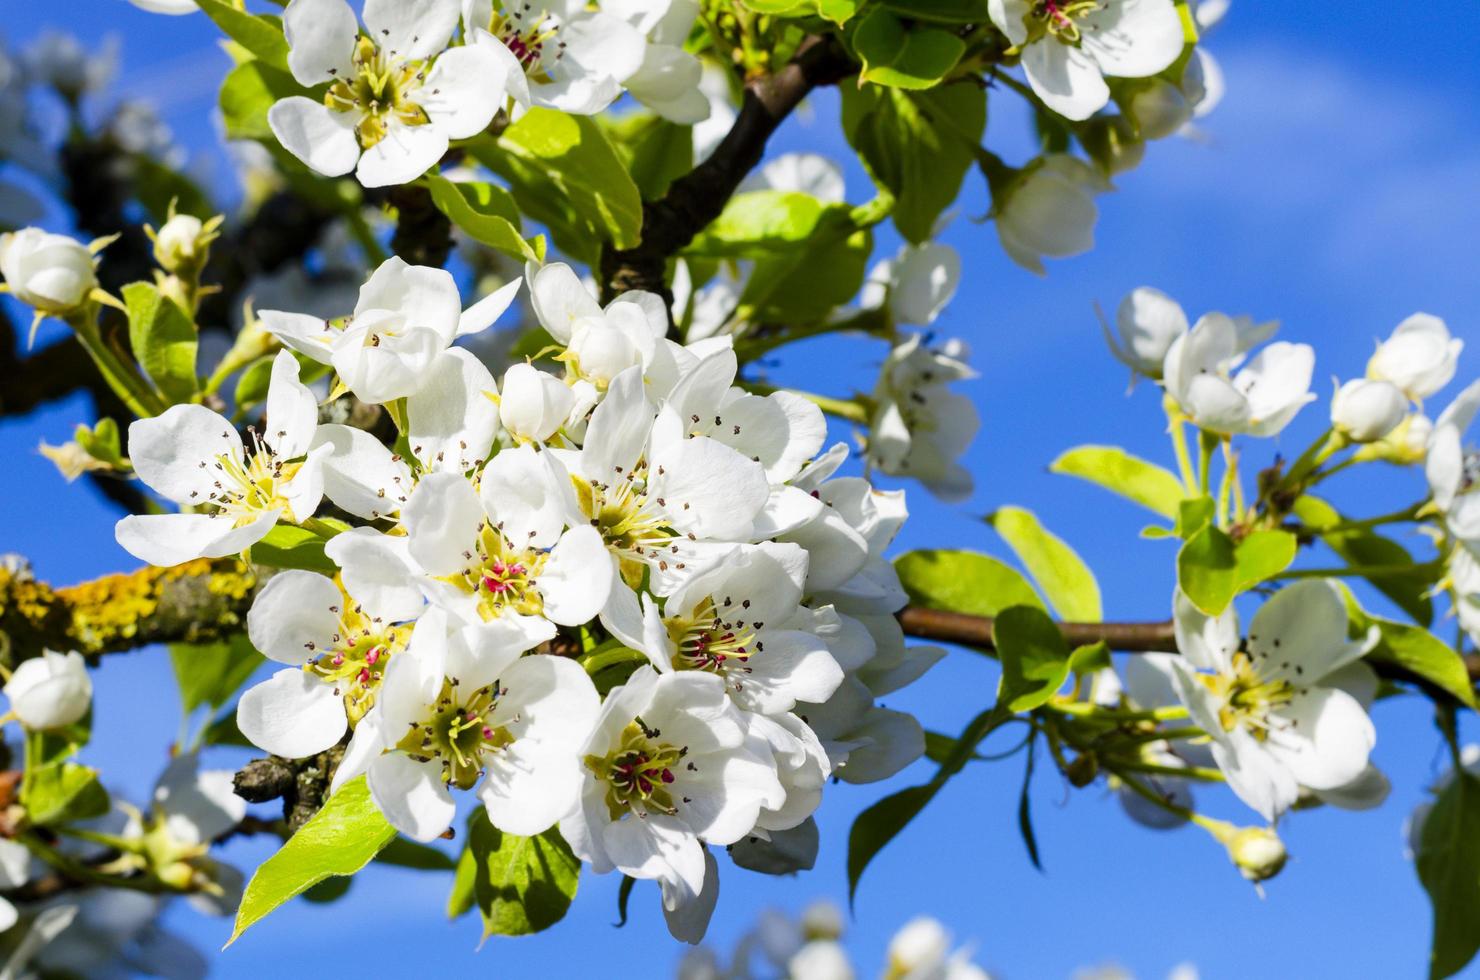 Blooming white flowers fruit trees on background of blue sky